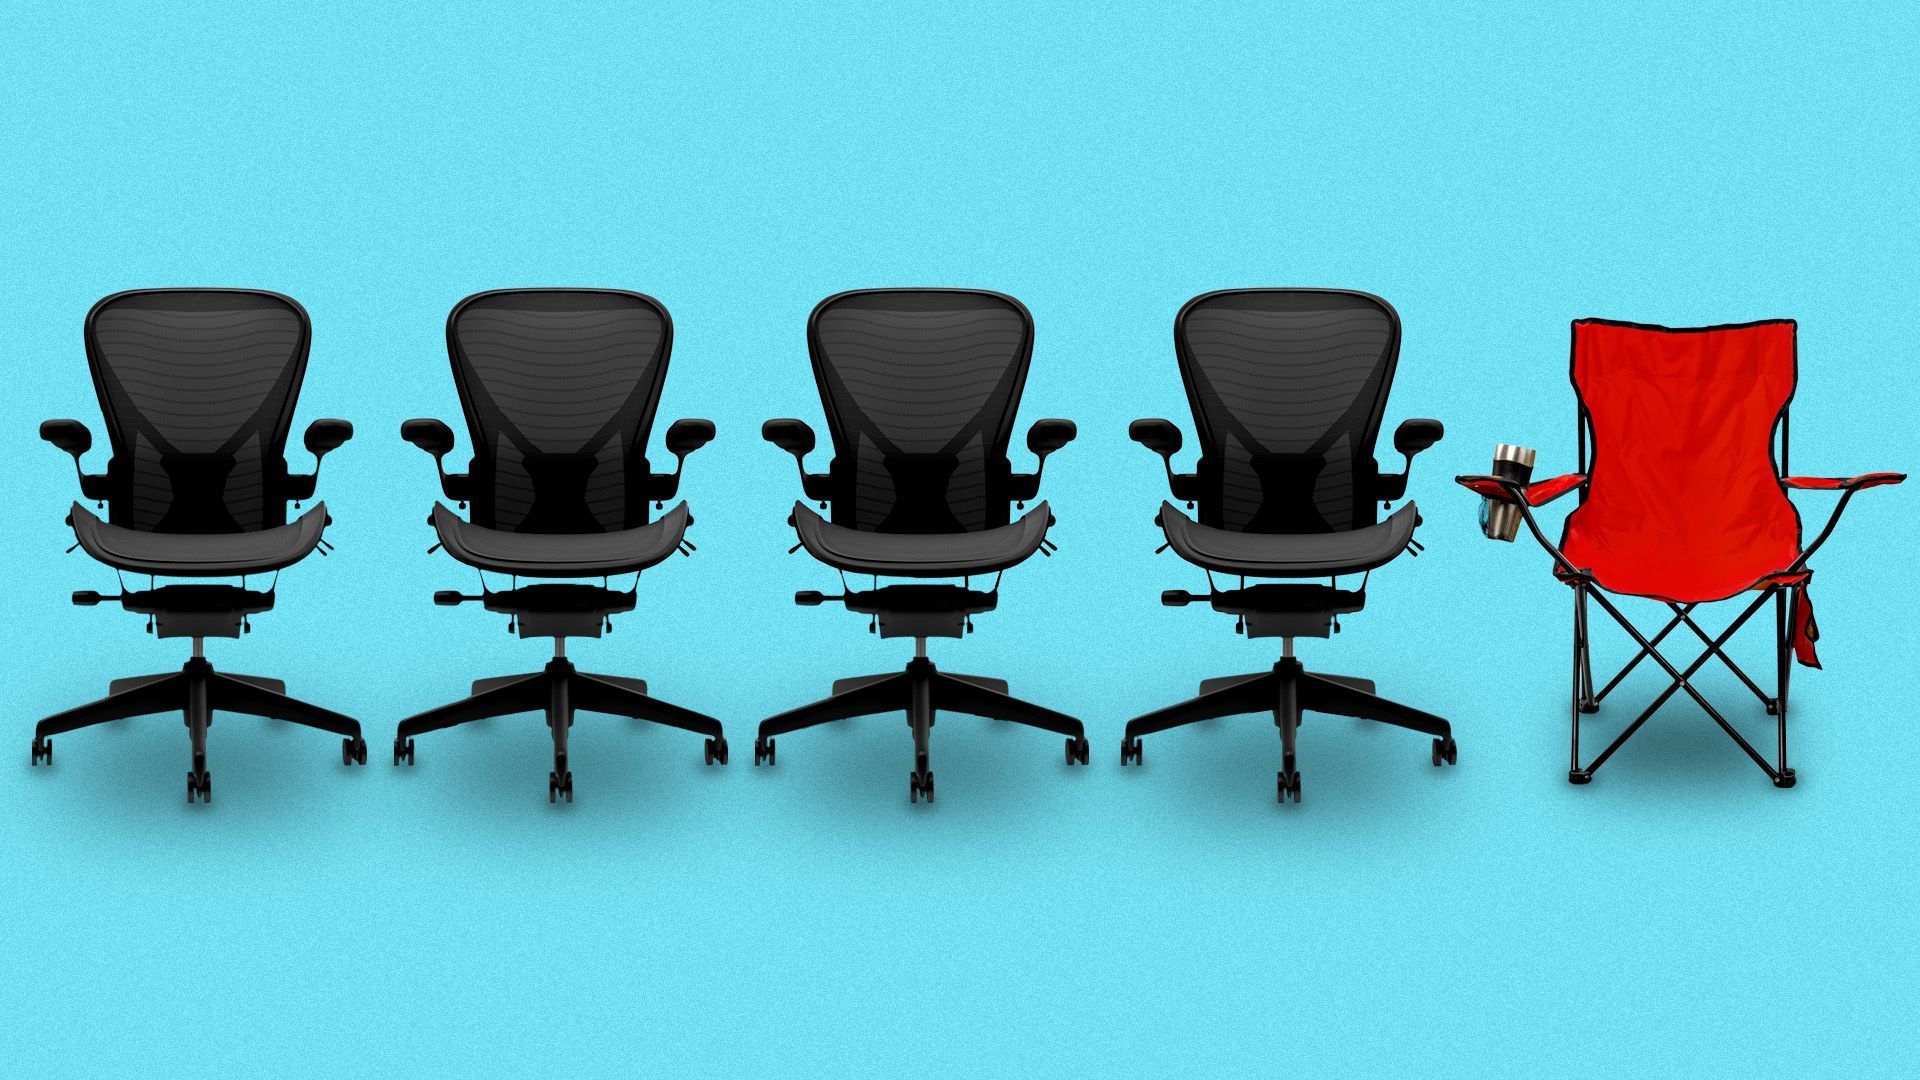 Illustration of four office chairs in a row followed by an outdoor camping chair